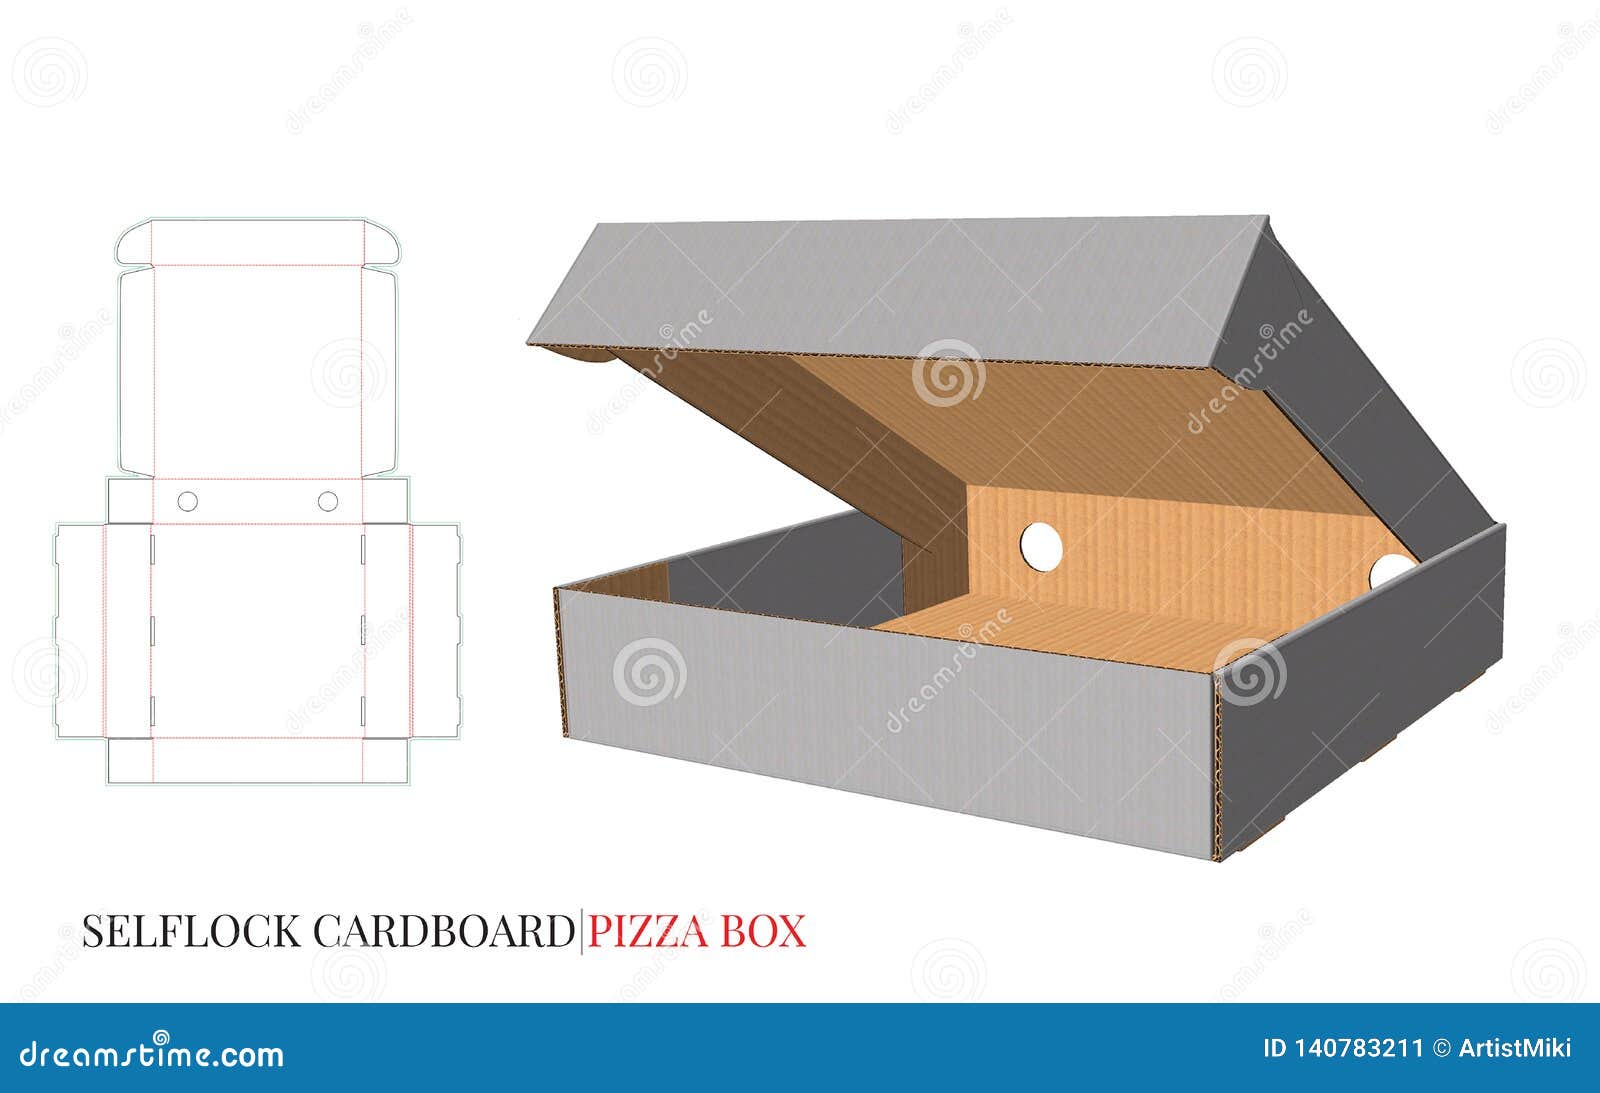 Cardboard Pizza Box Template With Die Cut Lines Clear Blank Isolated Pizza Box Mock Up On White Background Stock Vector Illustration Of Storage Paper 140783211